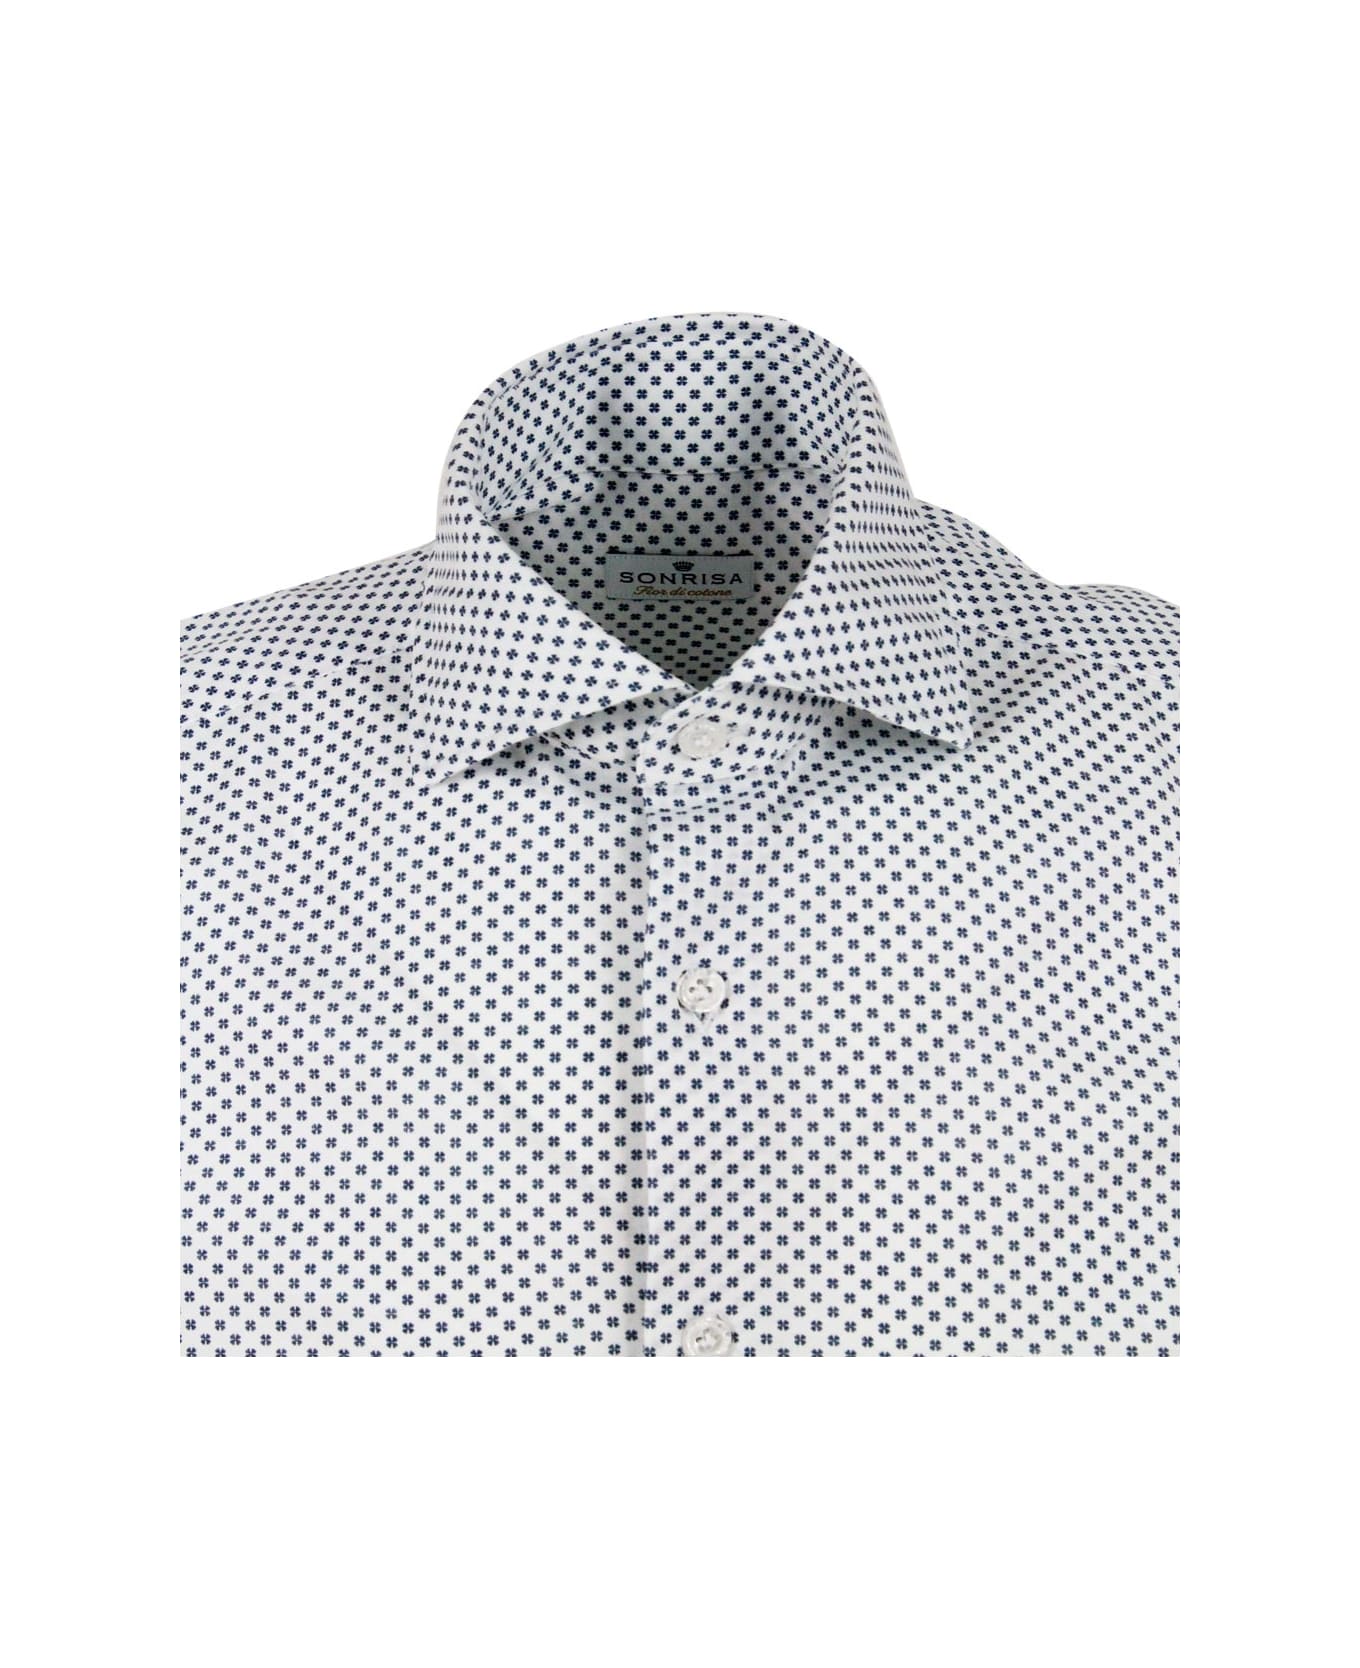 Sonrisa Luxury Shirt In Soft, Precious And Very Fine Stretch Cotton Flower With French Collar In Small Blue Four-leaf Clover Print - White